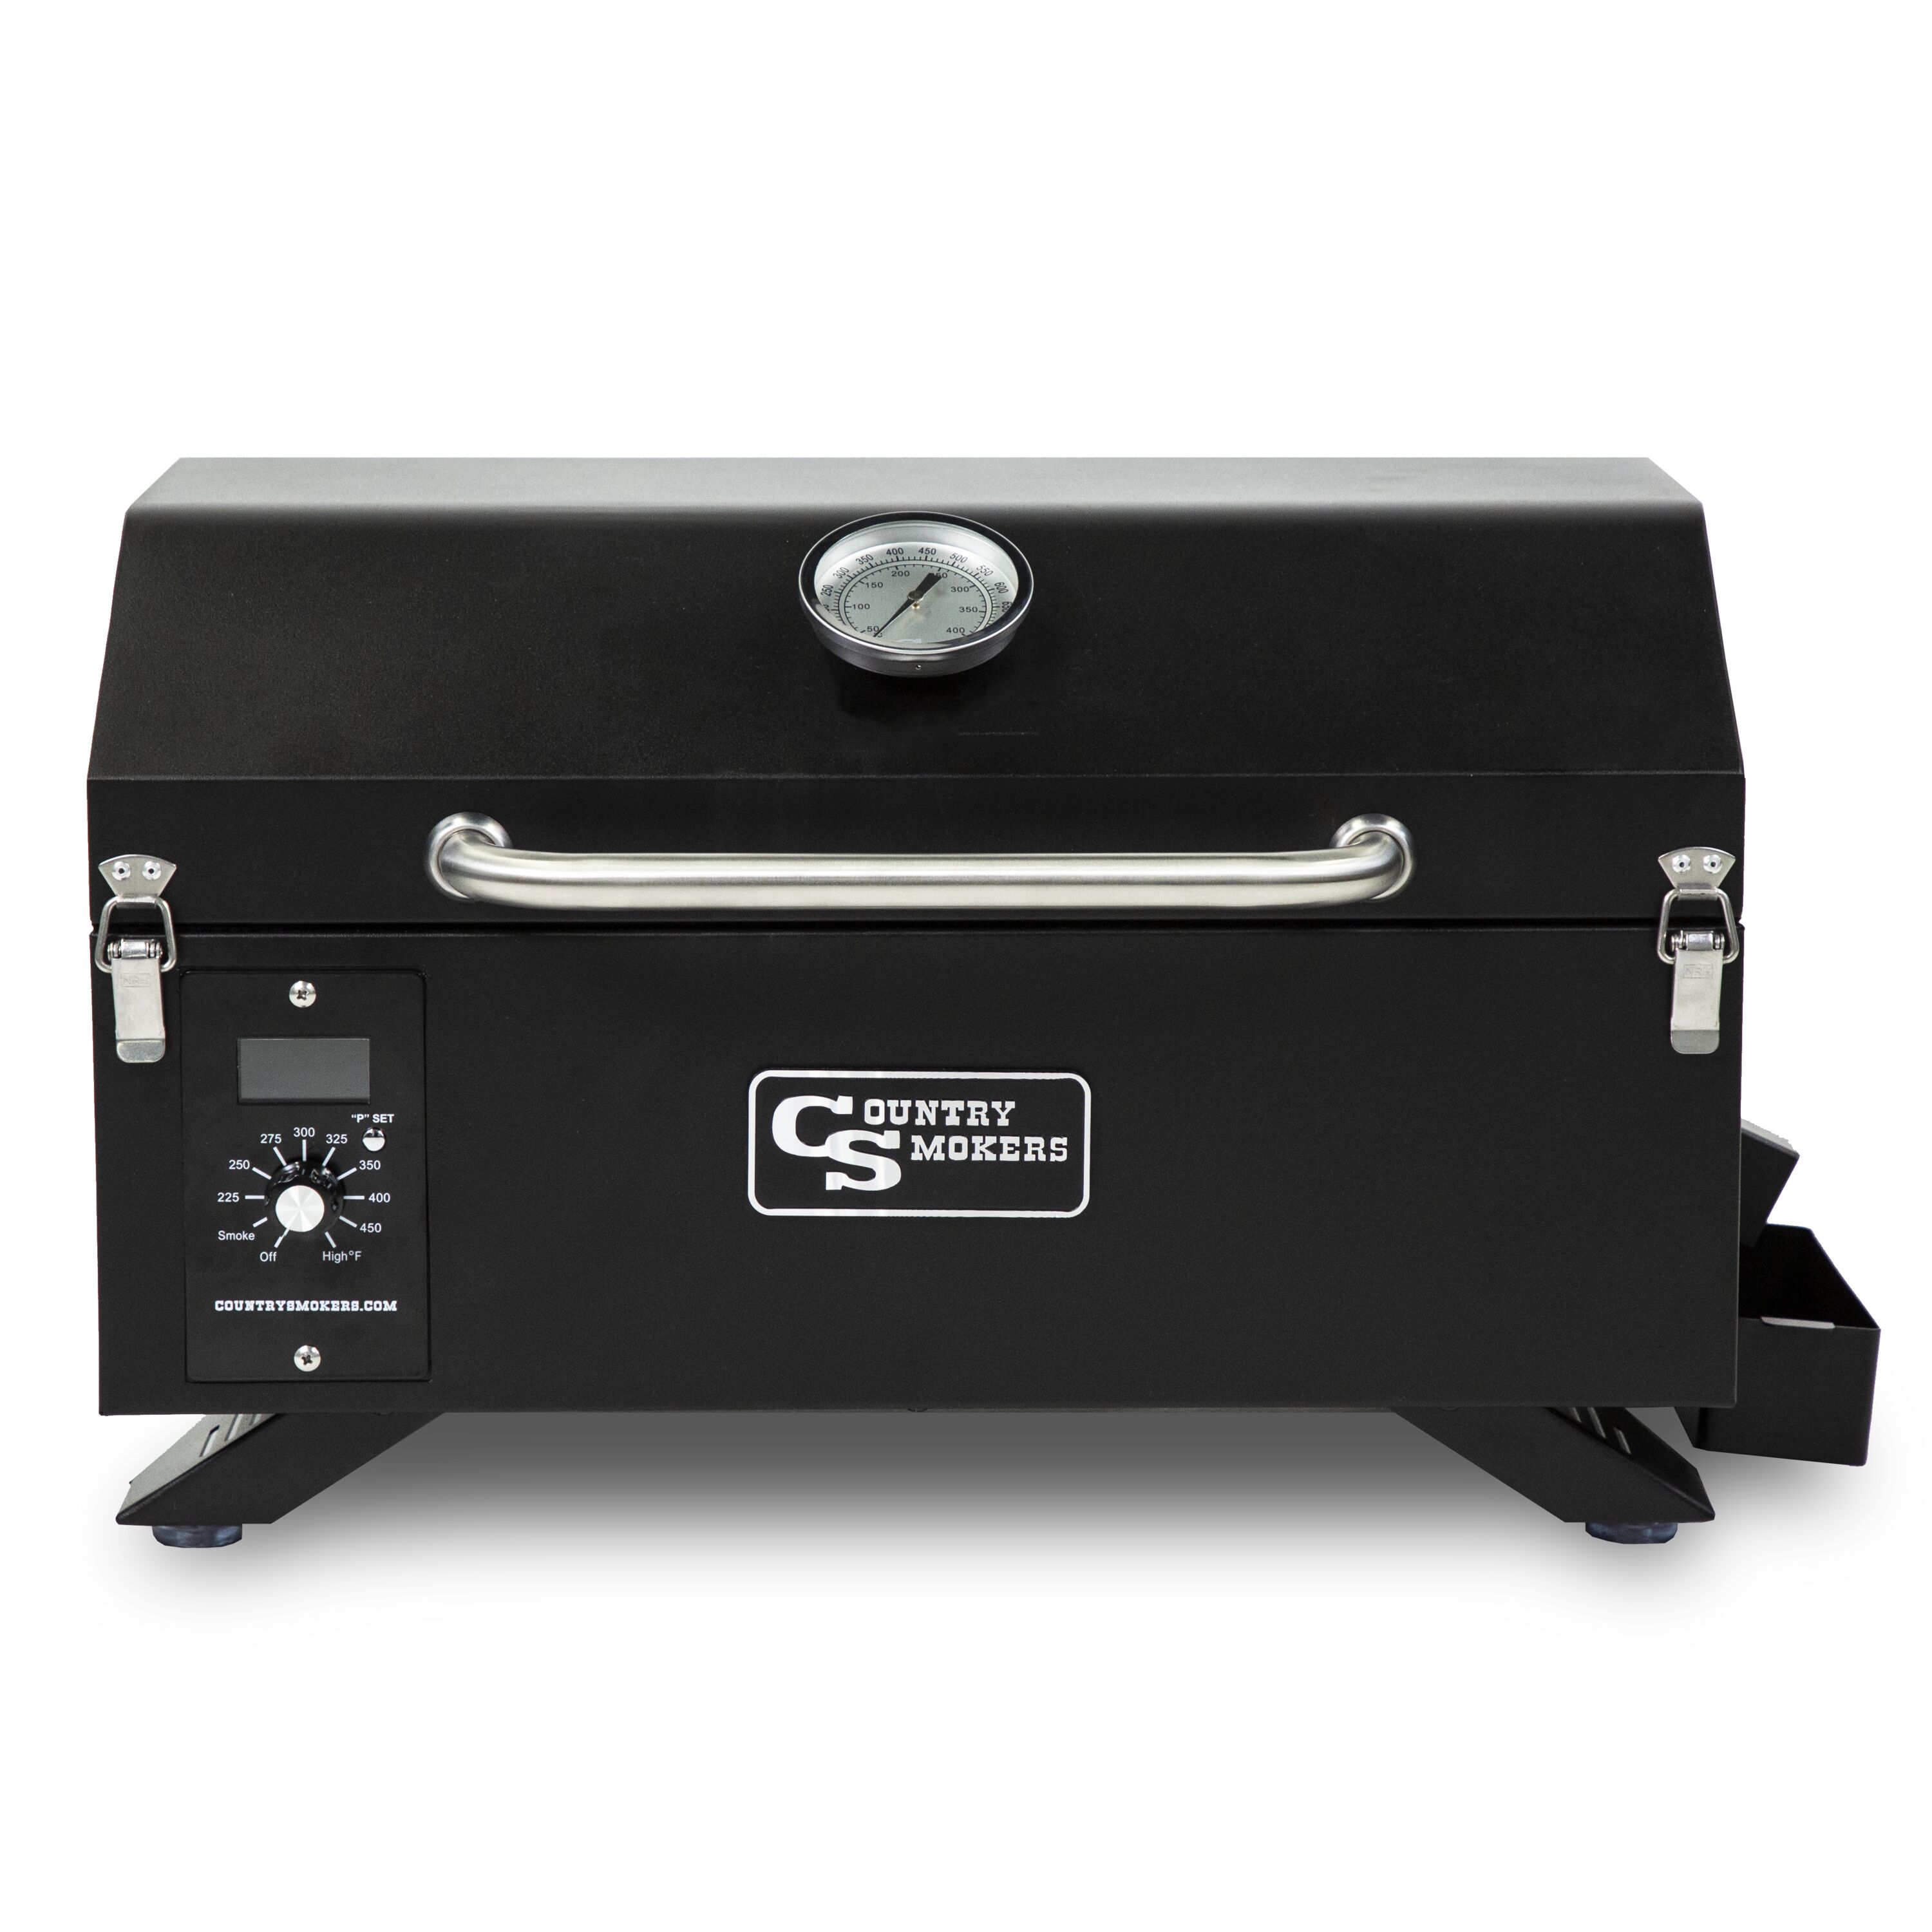 Indoor Electric Grill Kitchen 165 Sq Inch Black Stainless Steel